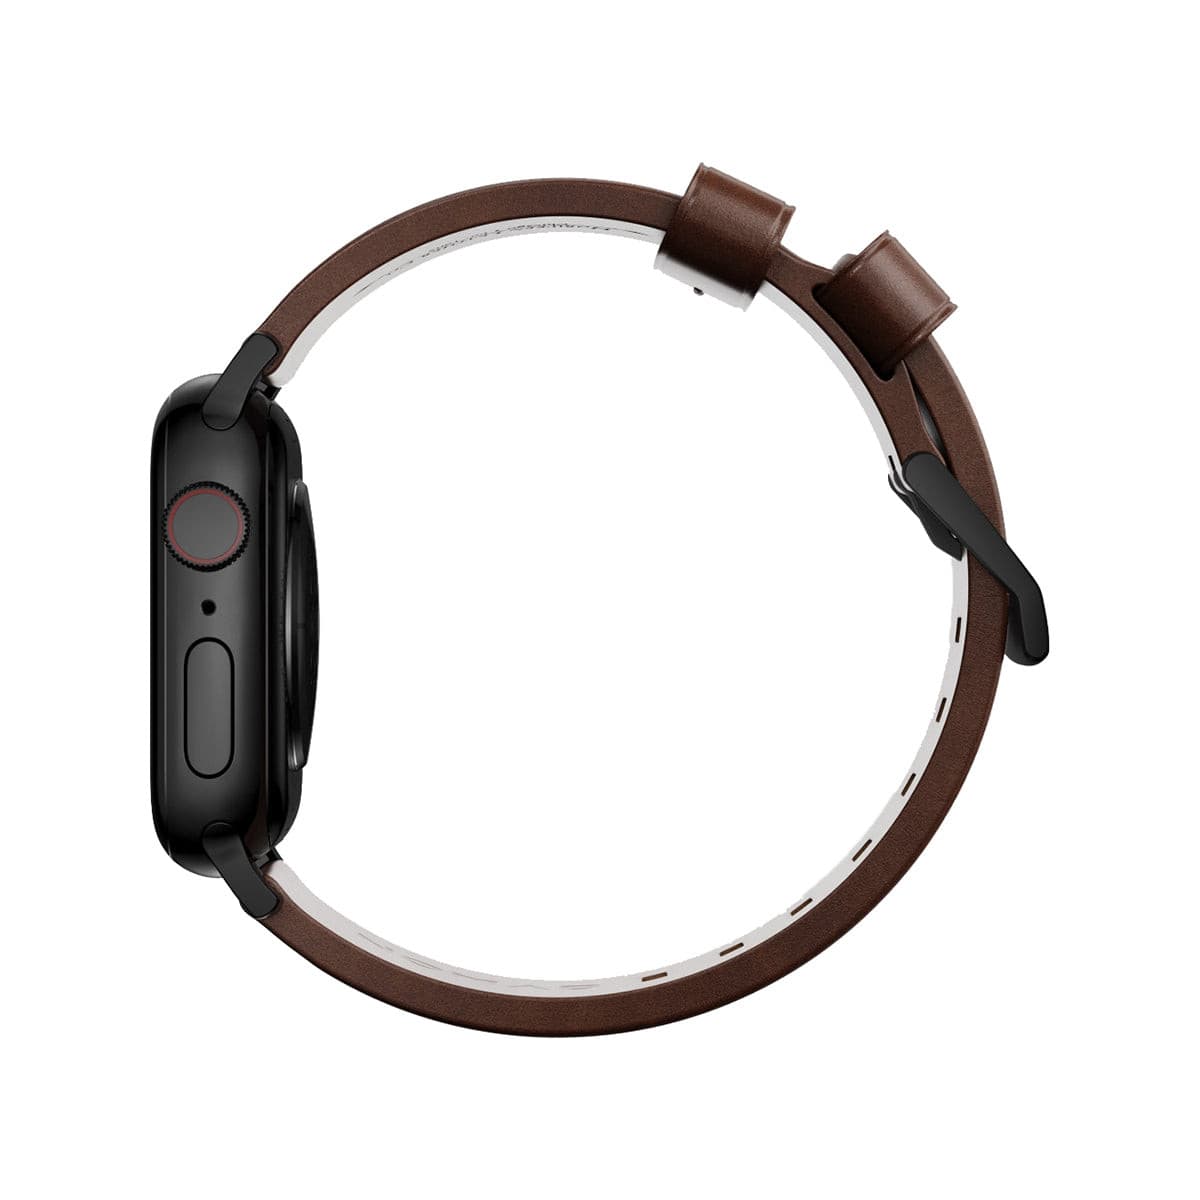 NOMAD Apple Watch Modern Band 45mm - Black Hardware with Rustic Brown Horween Leather Strap.